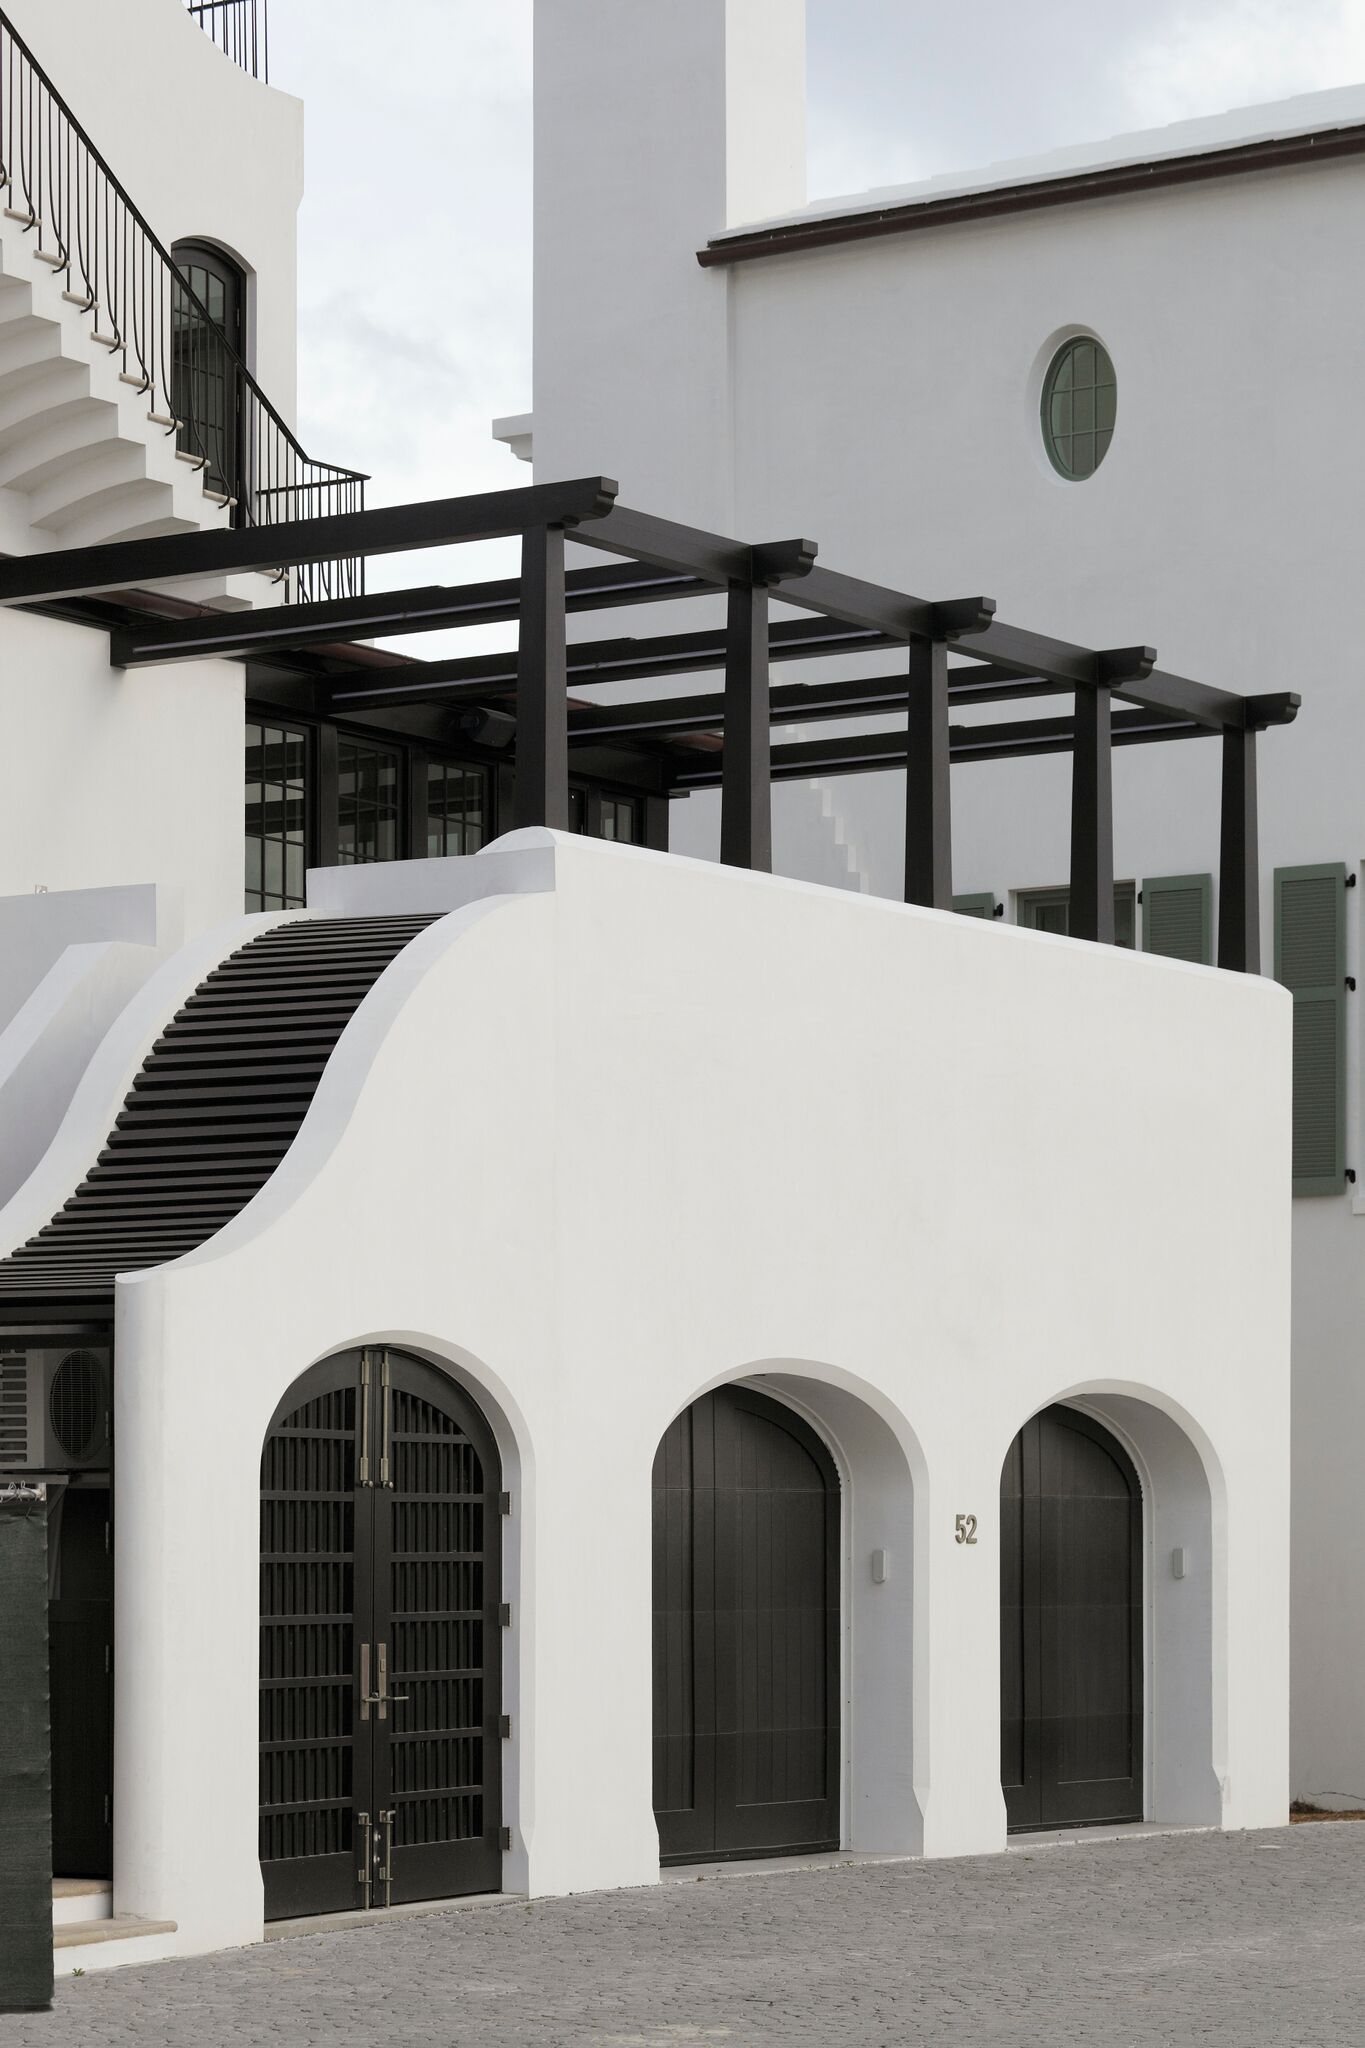 Black and white stucco house exterior in Alys Beach. Stunning interior design and Timeless Architecture Inspiration: Jeffrey Dungan. Photo: William Abranowicz. #classicdesign #traditional #architecture #jeffreydungan #sophisticateddesign #architect